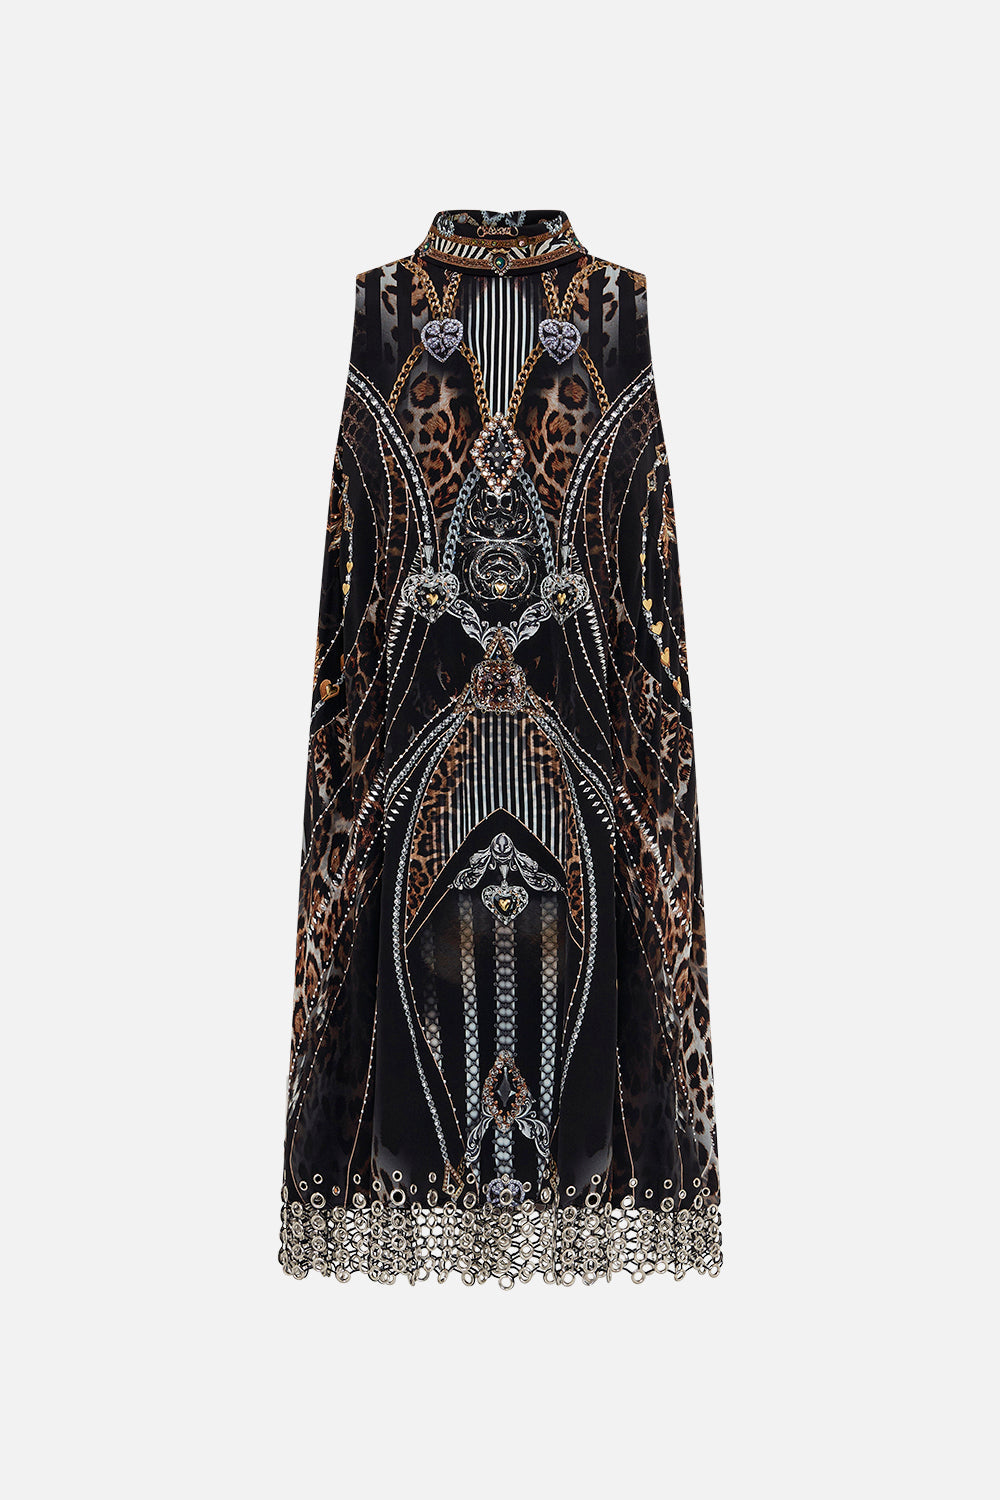 Product view of CAMILLA silk shift dress in Chaos In The Cosmos animal print